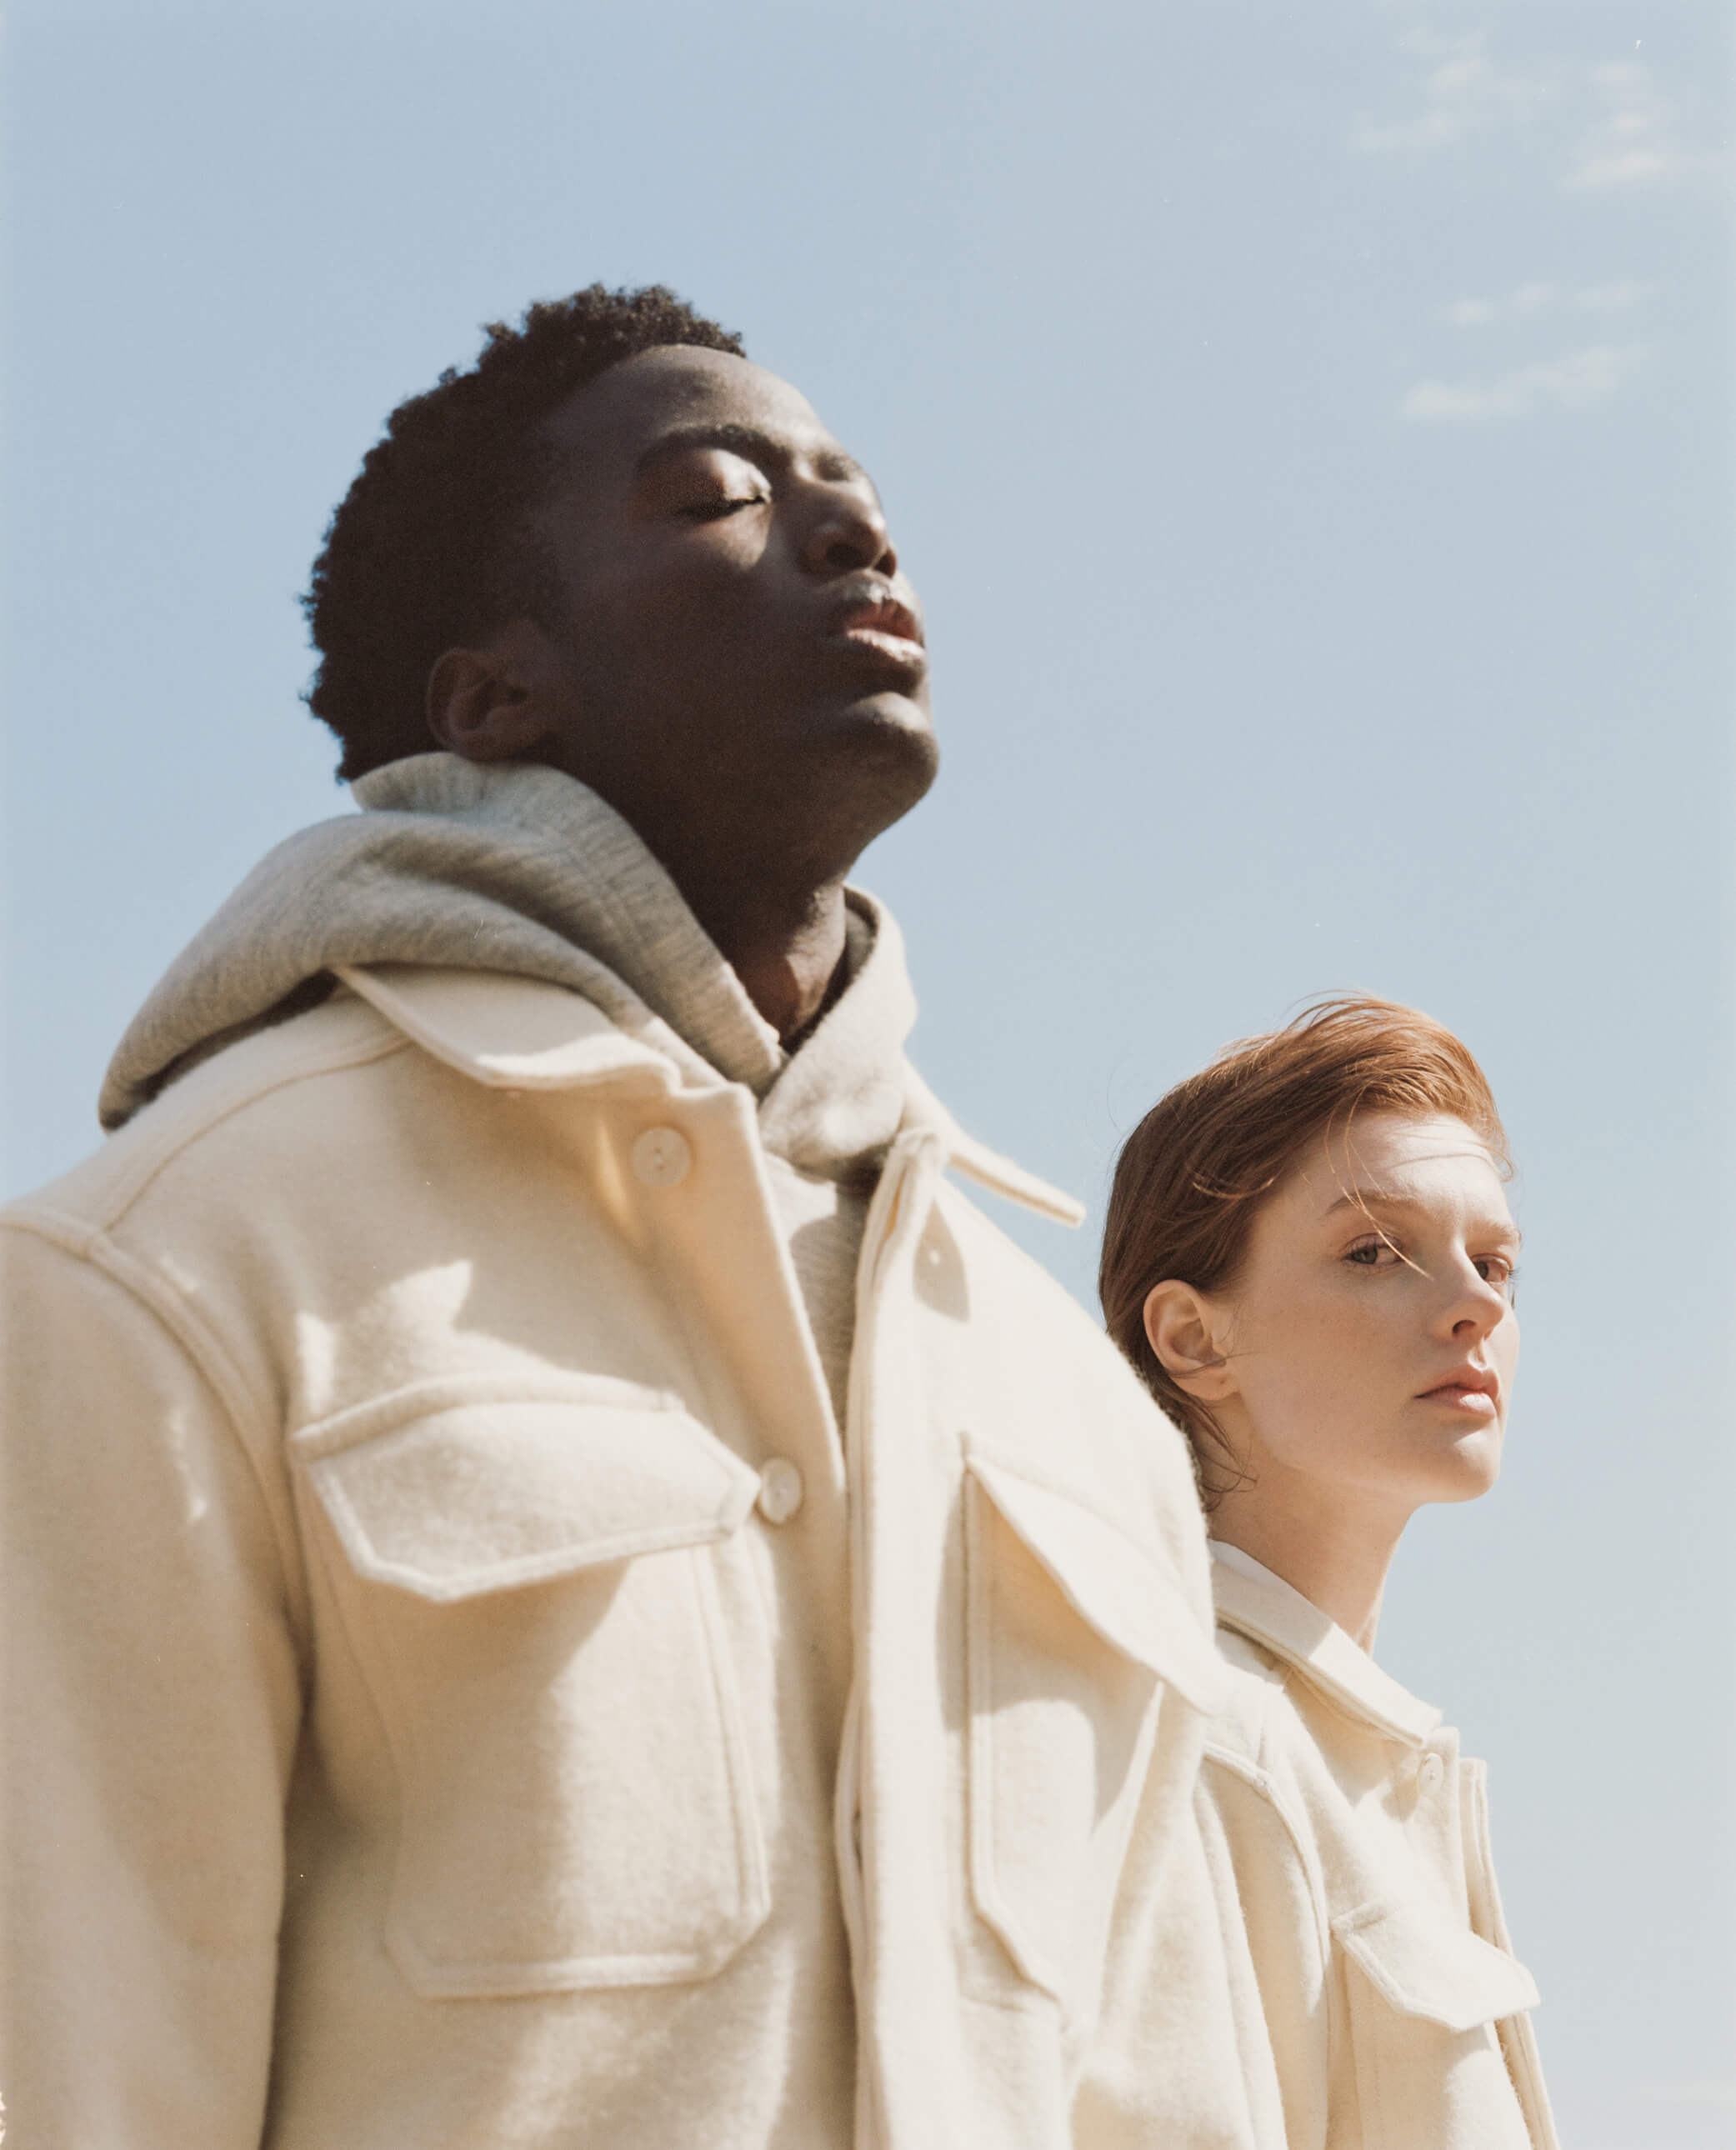 A man and a woman are wearing undyed wool jackets. The man is looking up at the sky. The woman looks at the camera.